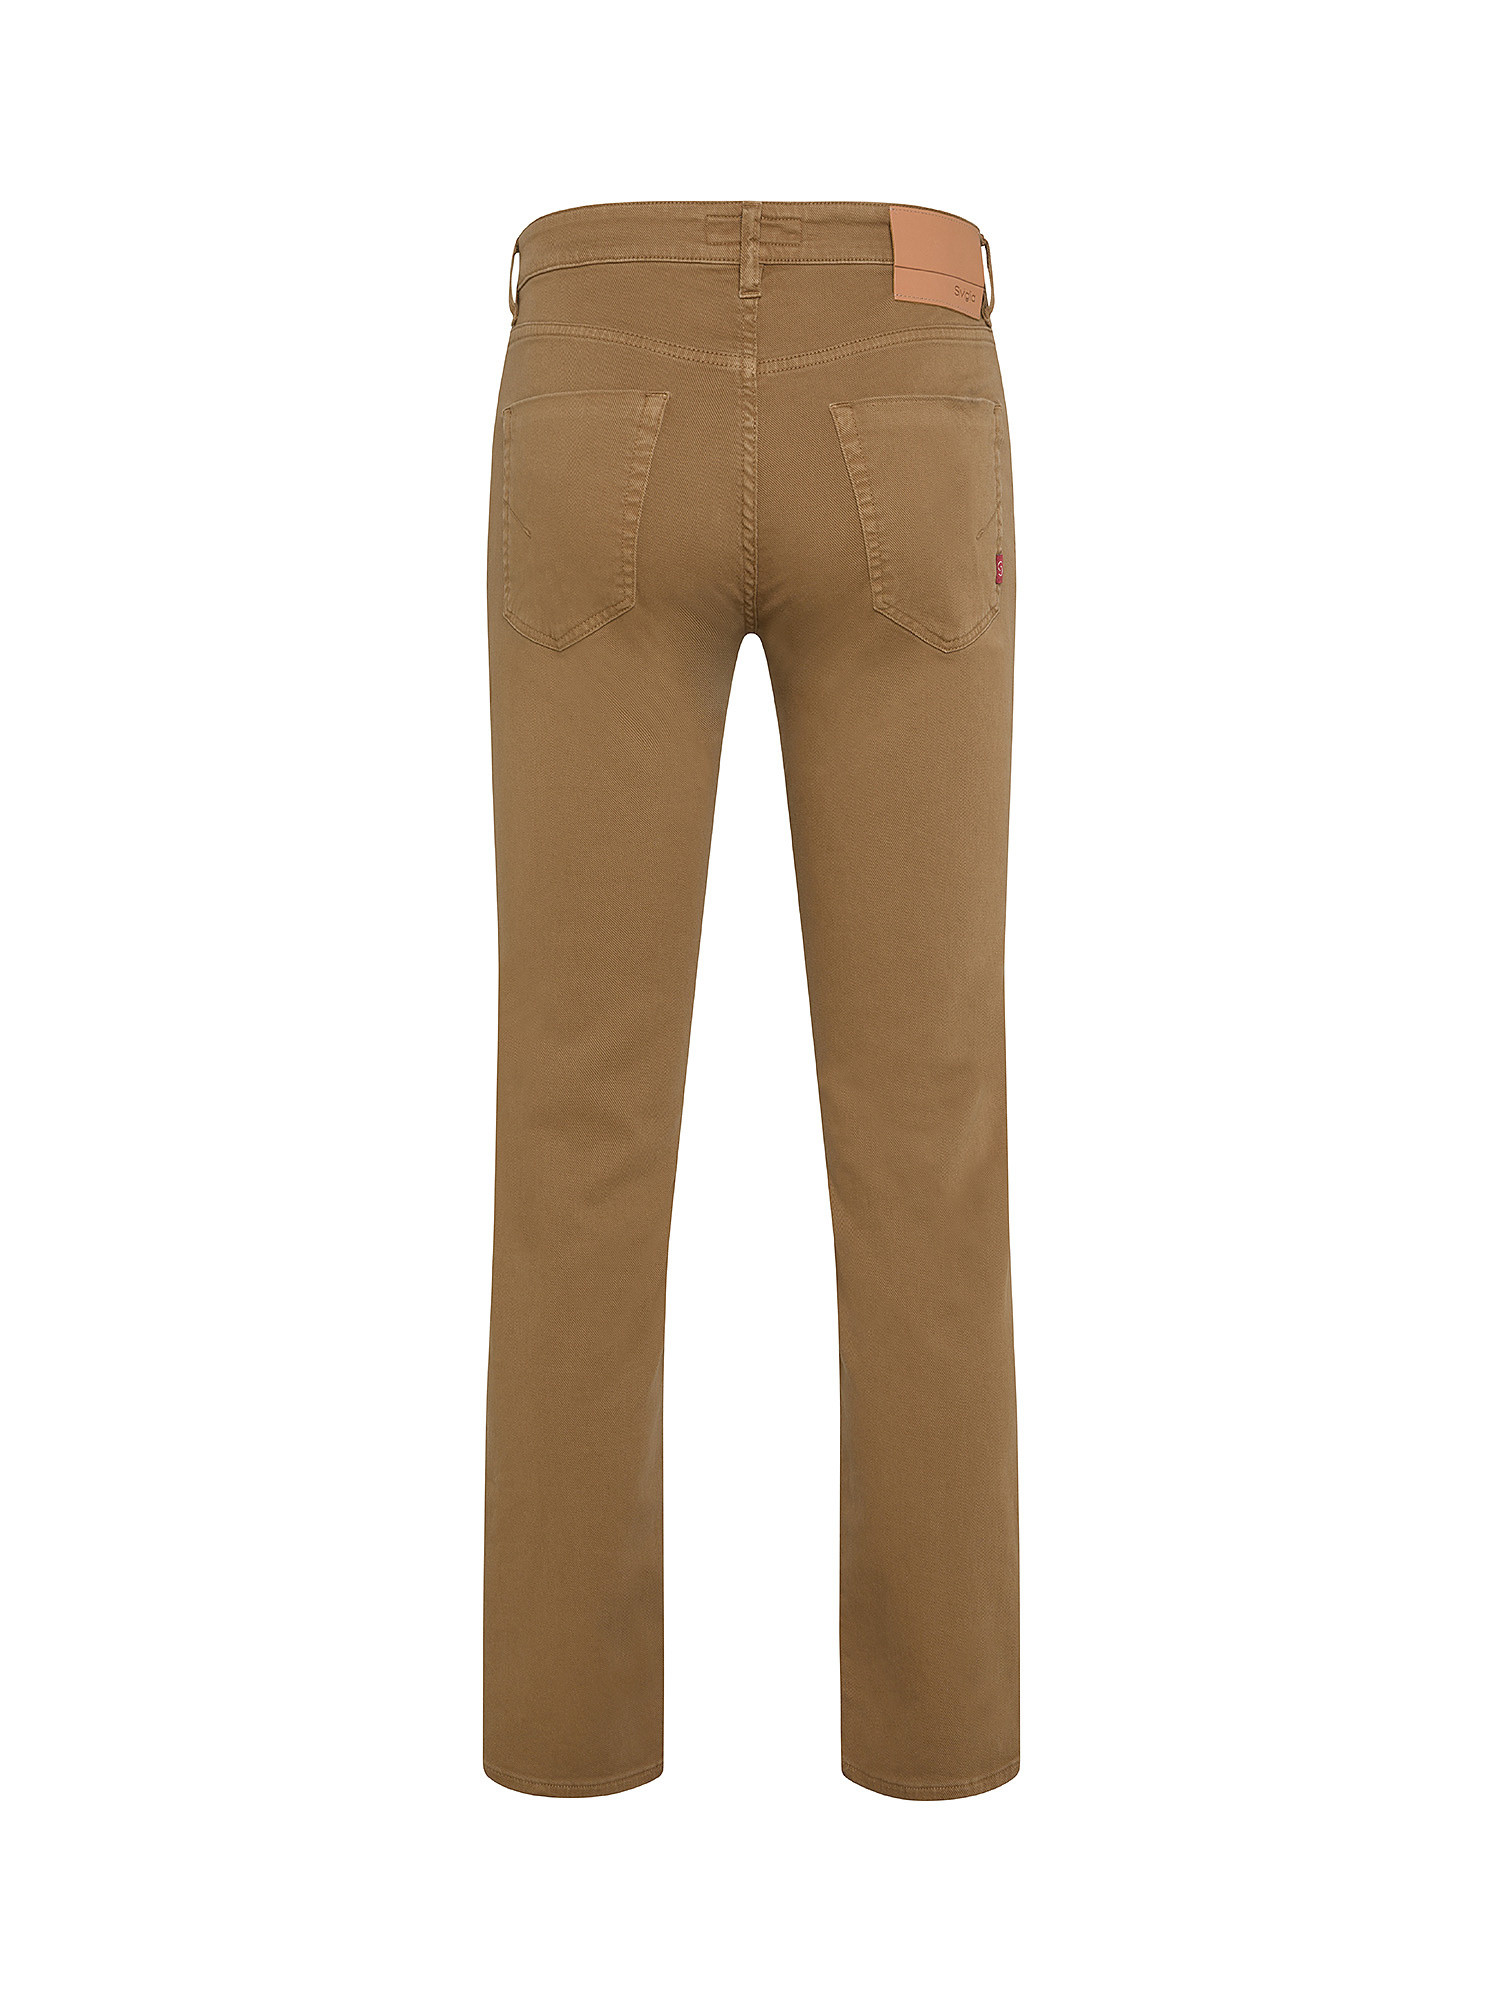 Siviglia - Five pocket trousers, Light Brown, large image number 1